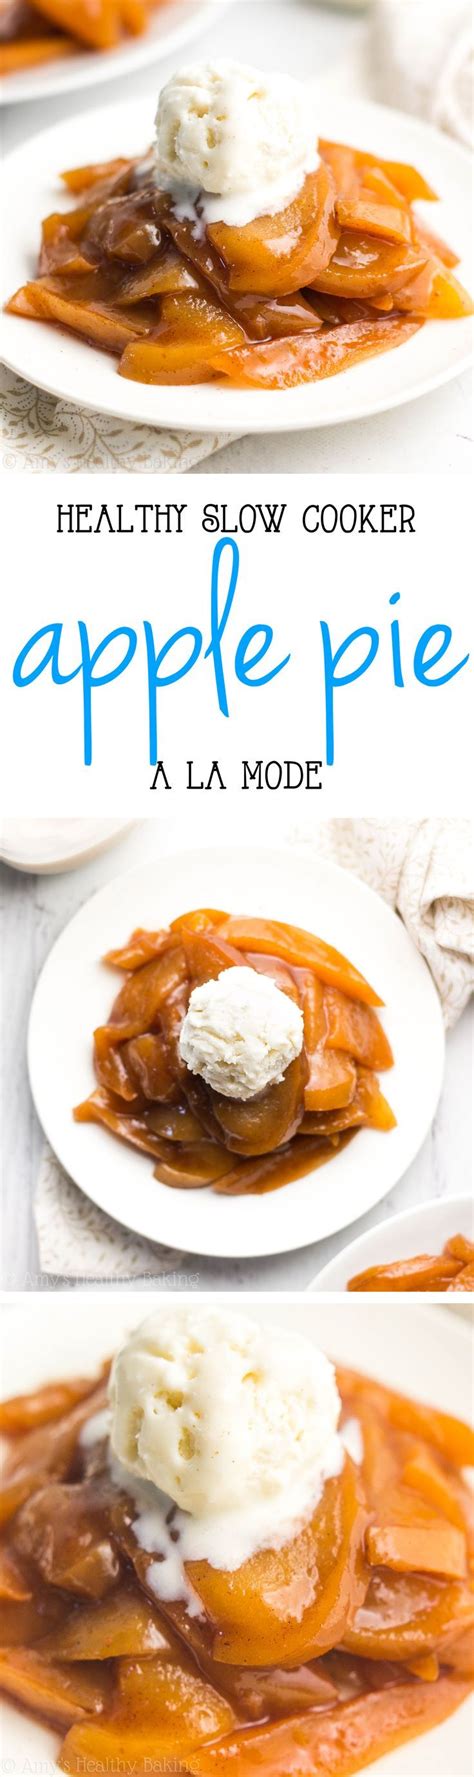 Healthy Slow Cooker Crustless Apple Pie à La Mode The Easiest Recipe You Ll Ever Make Just